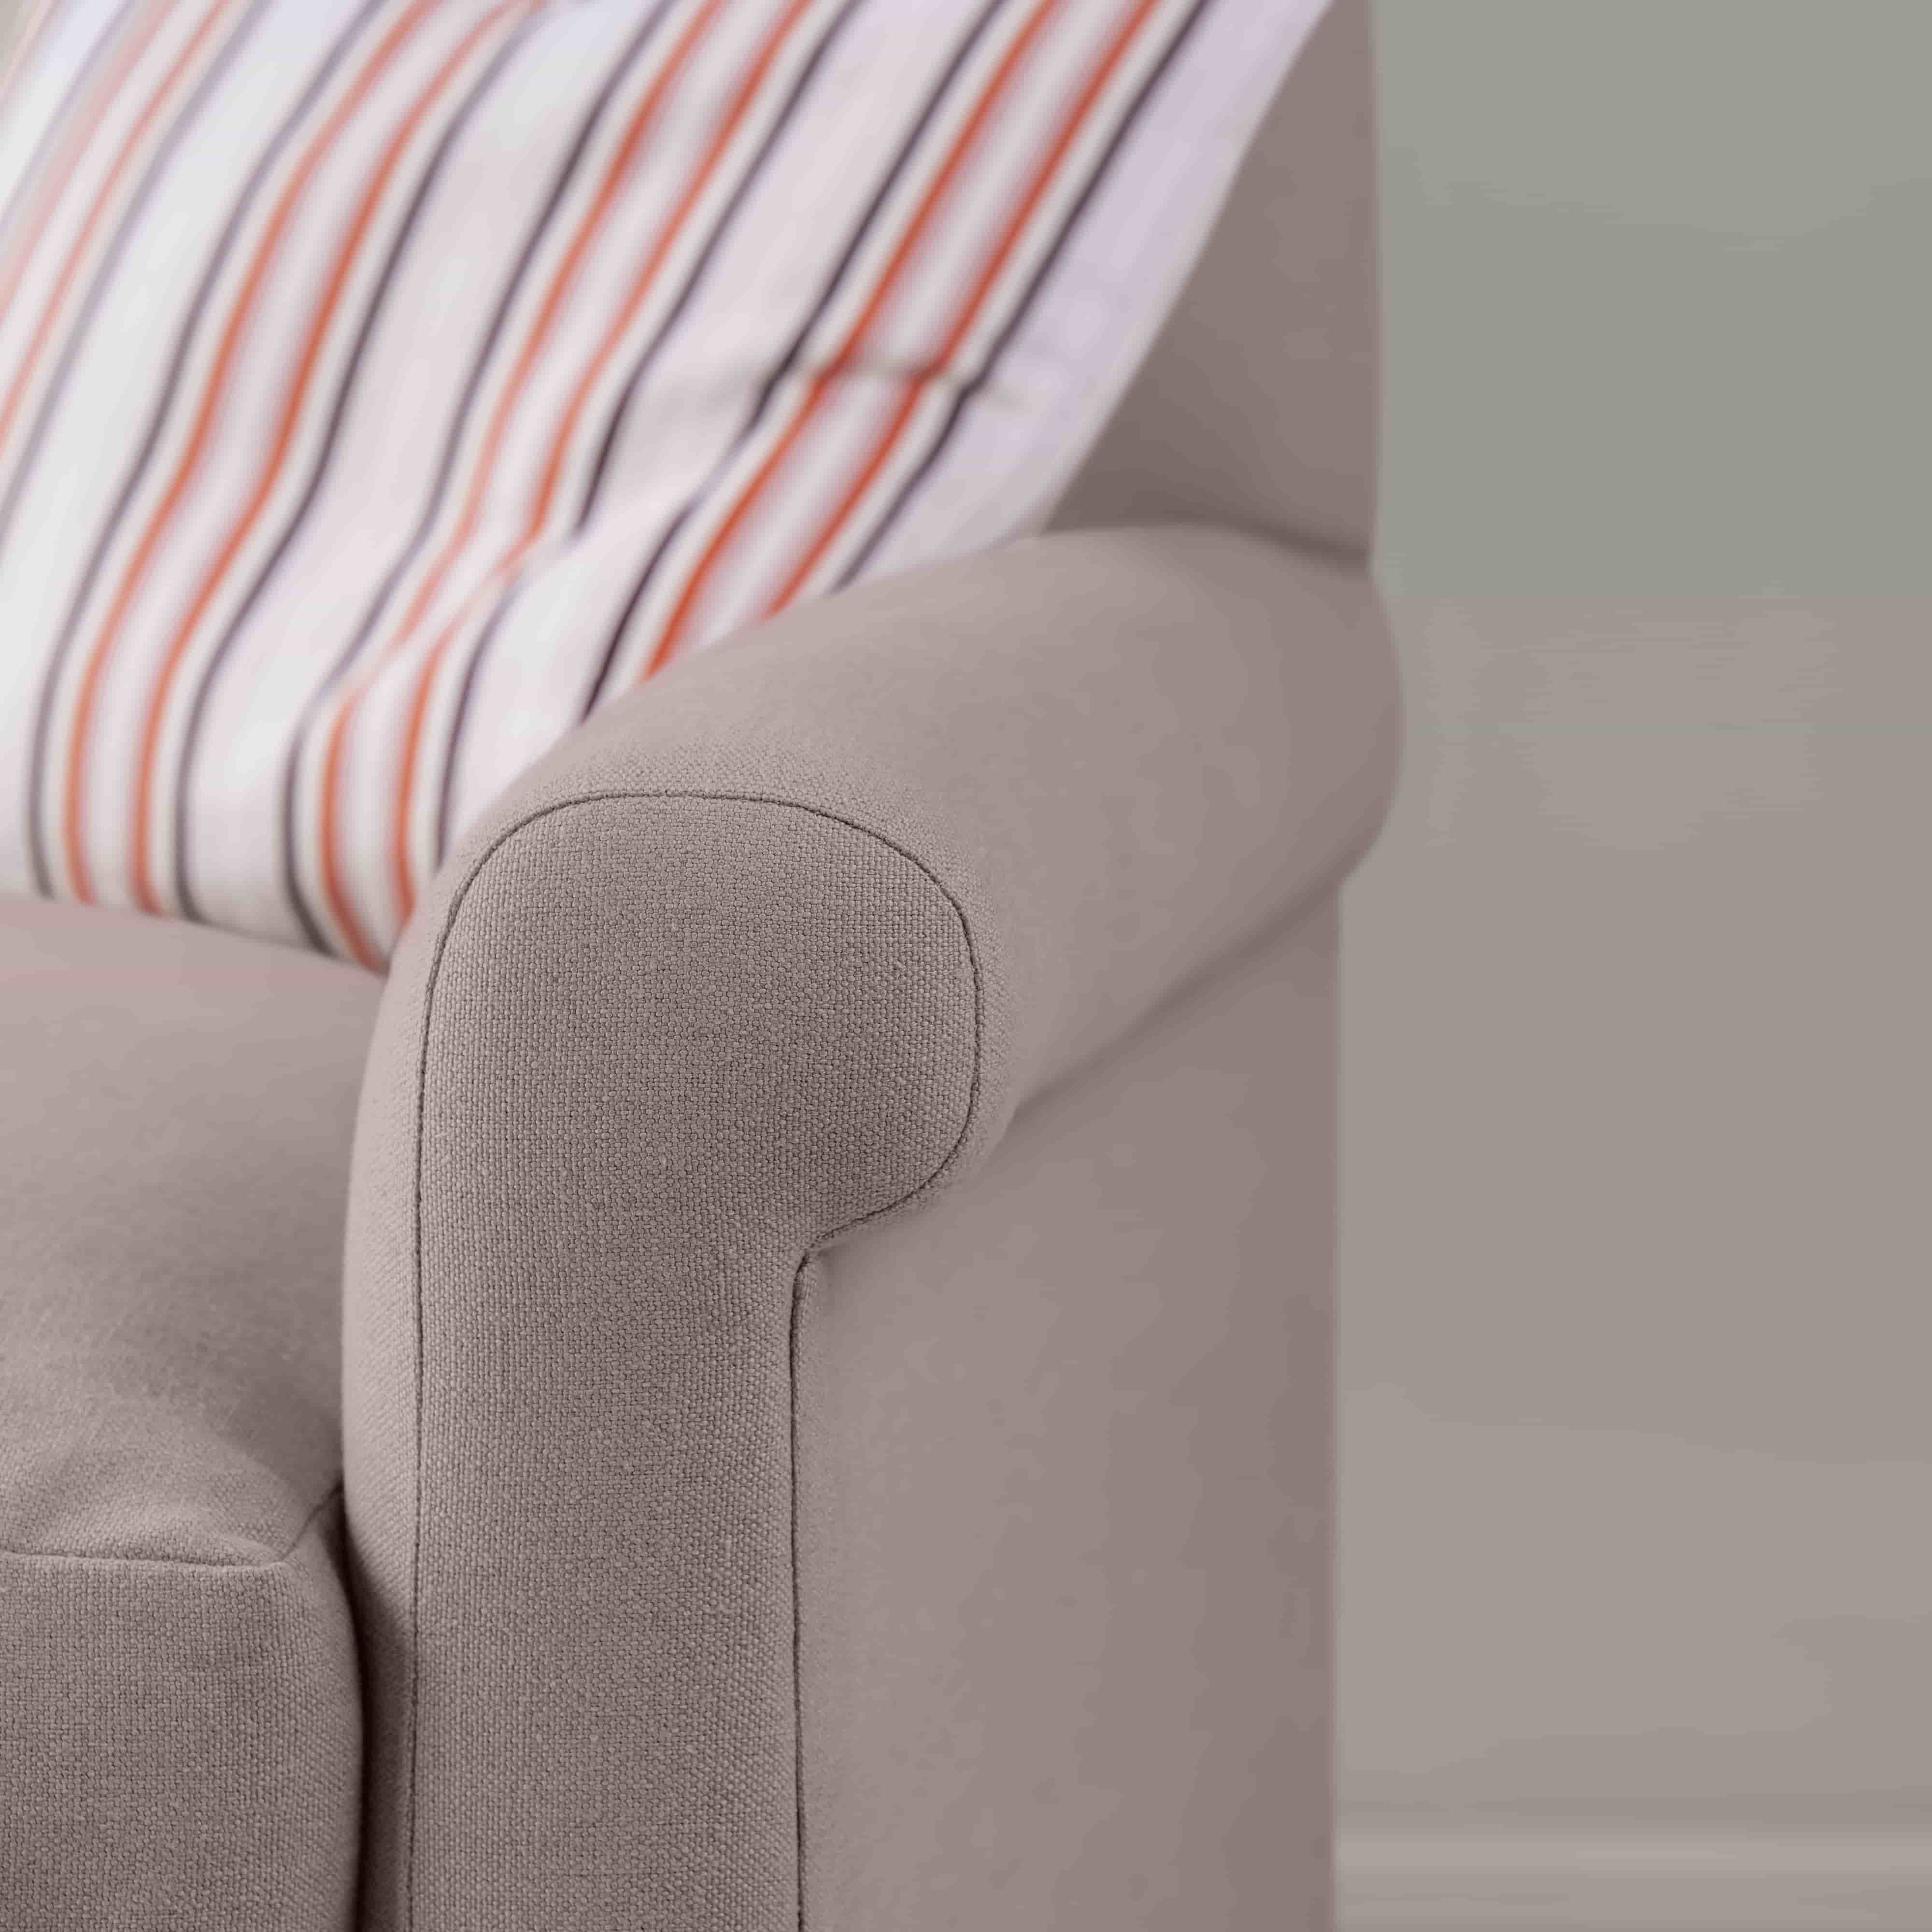  Idler Love Seat in Laidback Linen Heather 